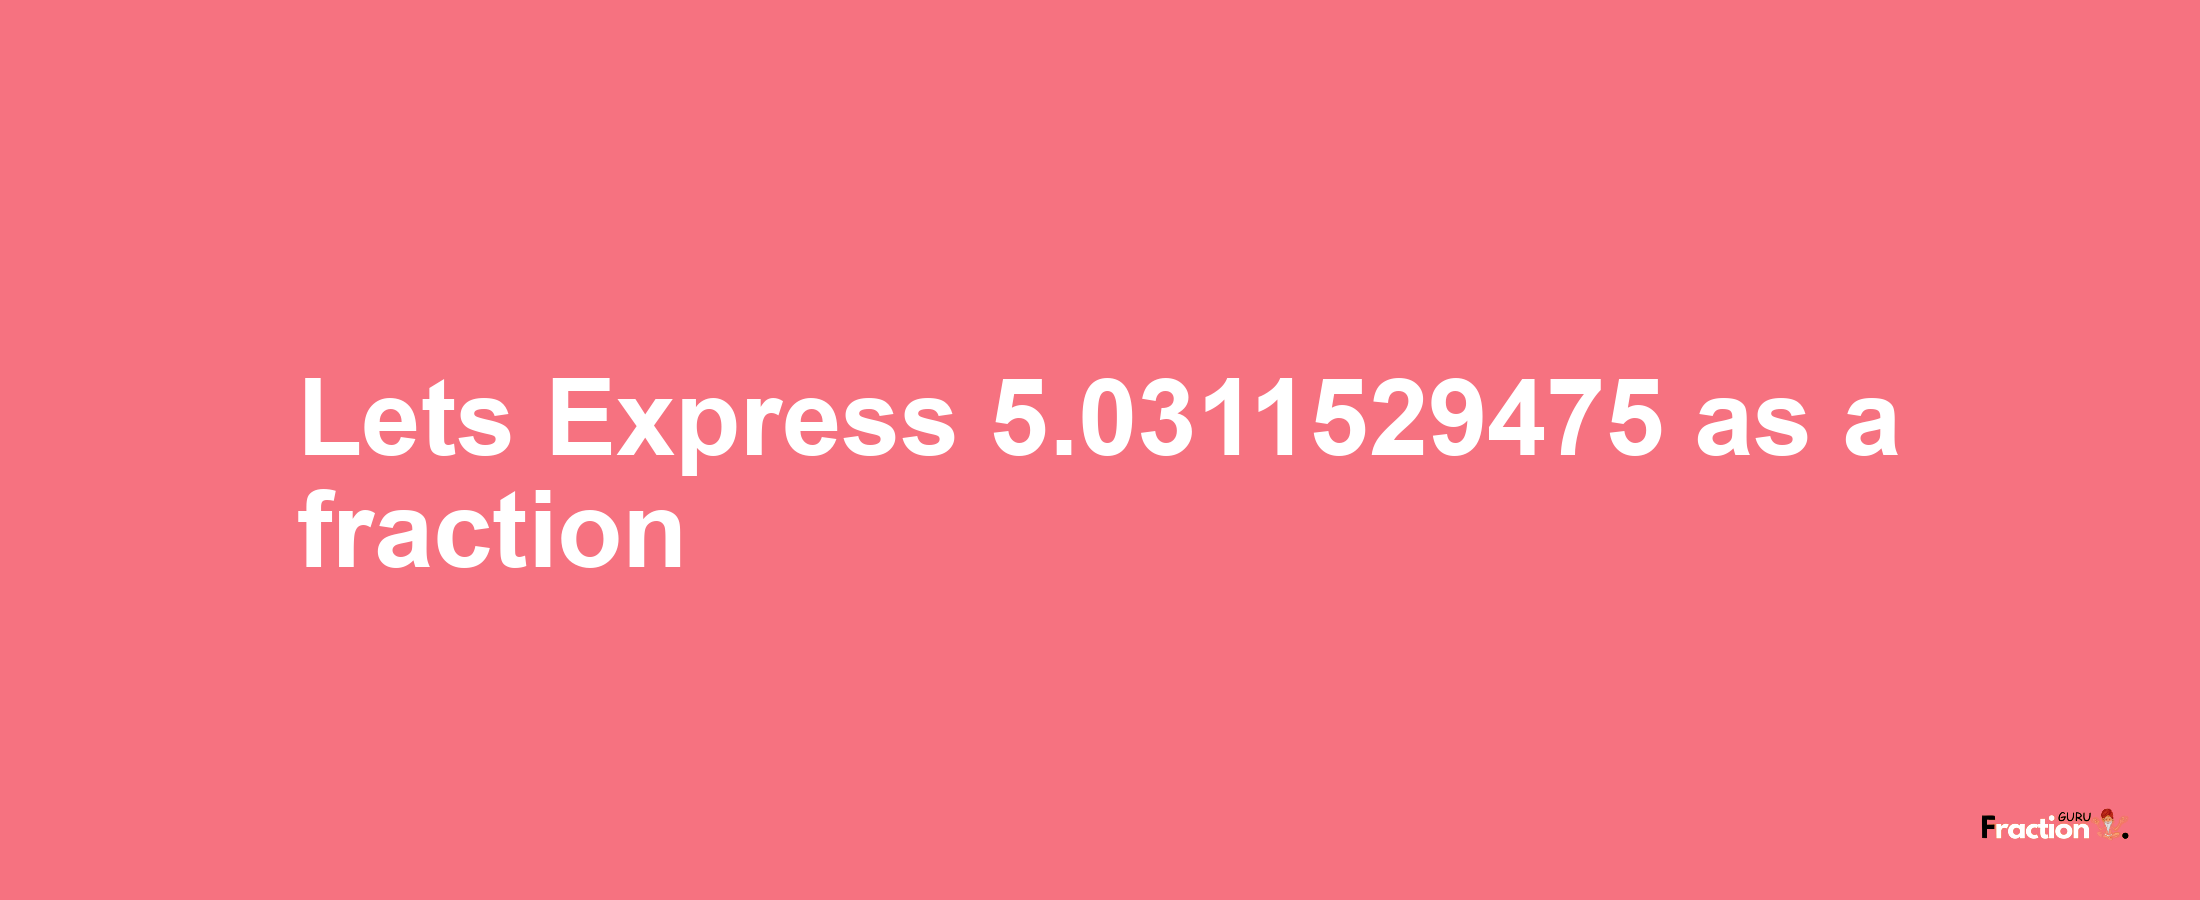 Lets Express 5.0311529475 as afraction